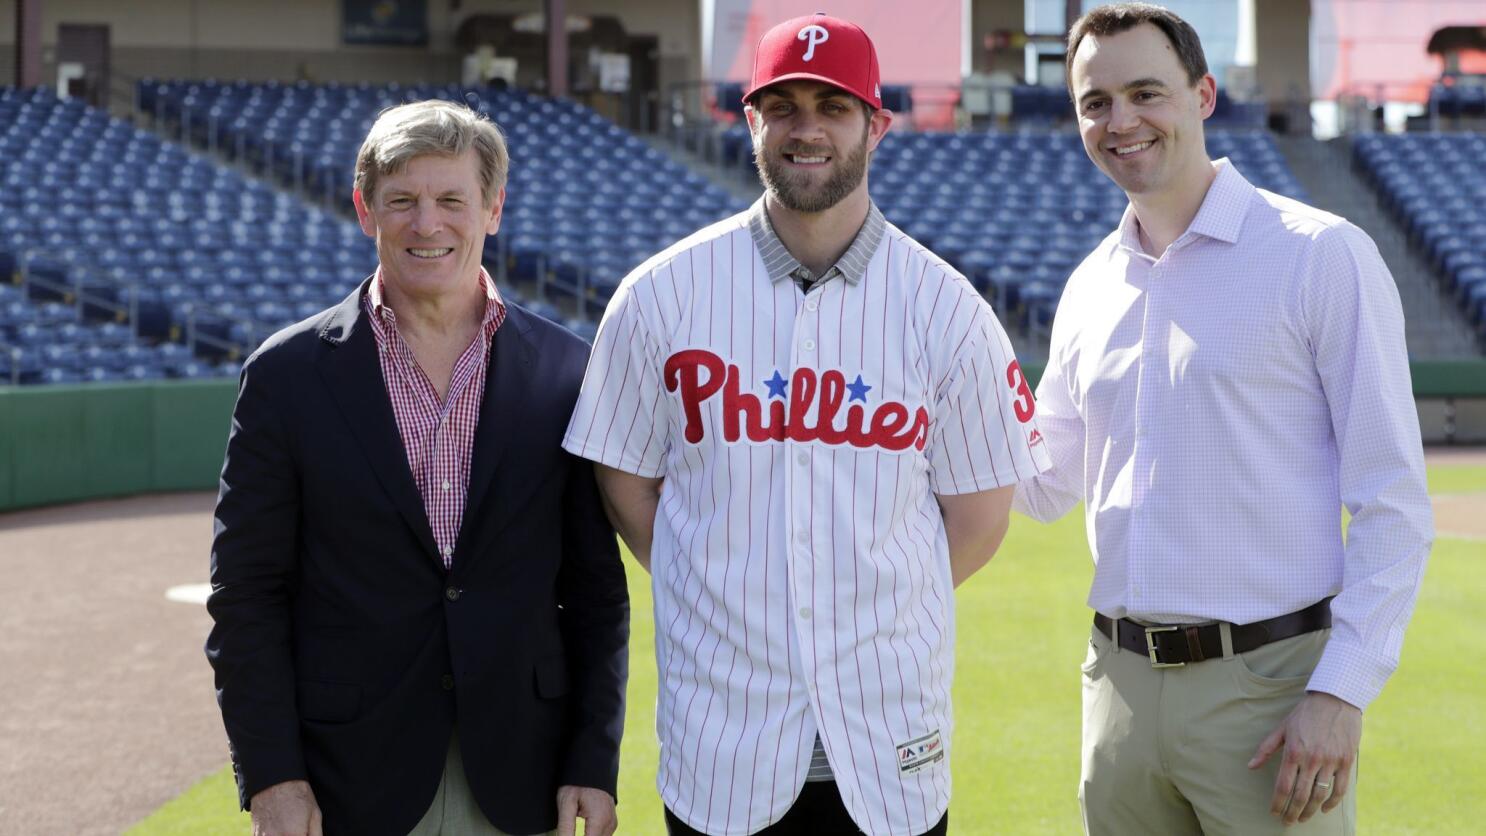 Bryce Harper says he signed with Phillies because they were in it for